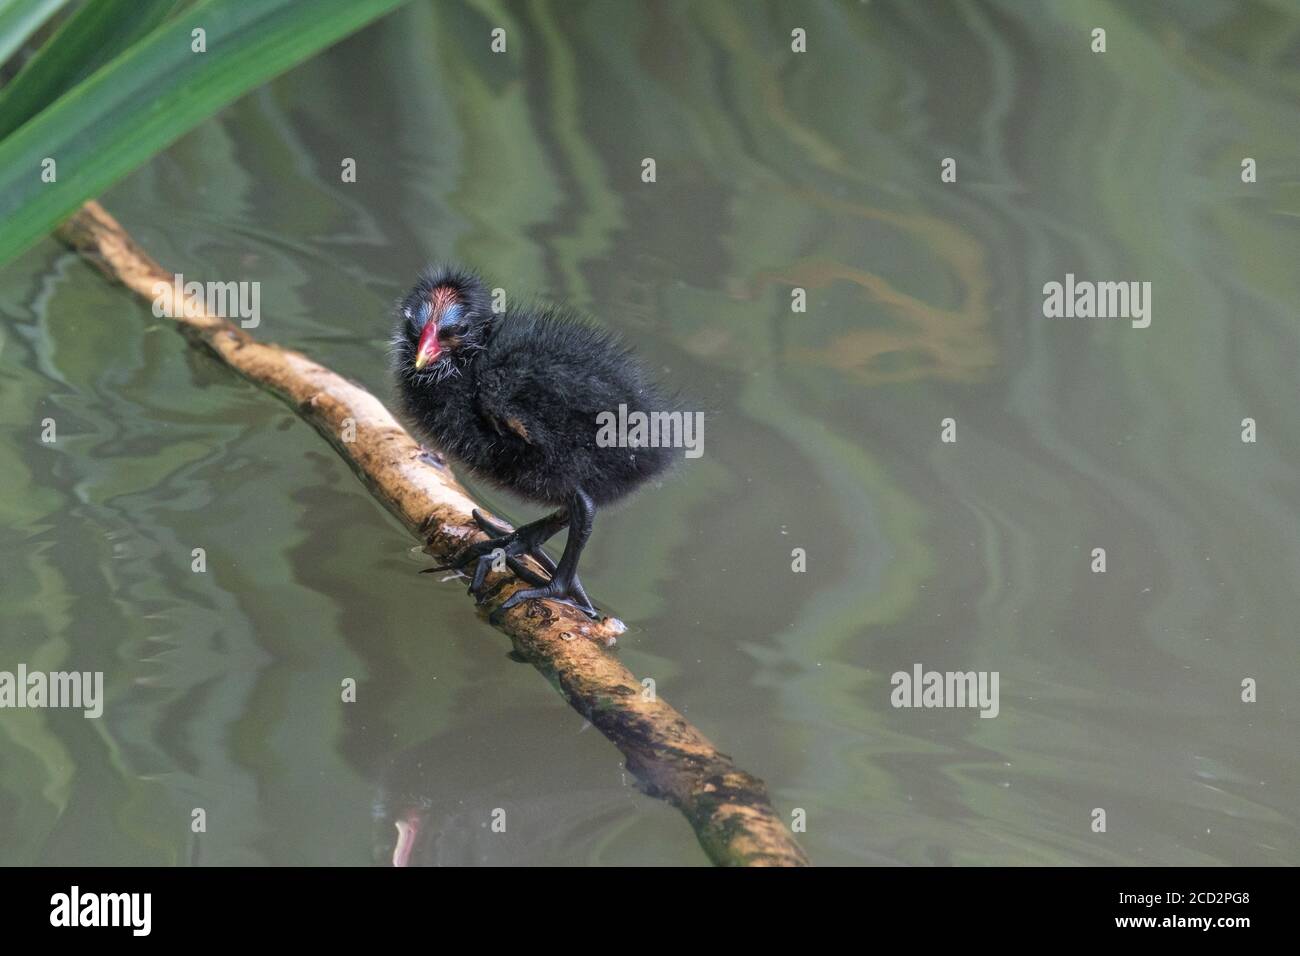 A moorhen chick stands on a stick in the water at the park. Taken in Pinner Memorial Park, Pinner, West London. Stock Photo